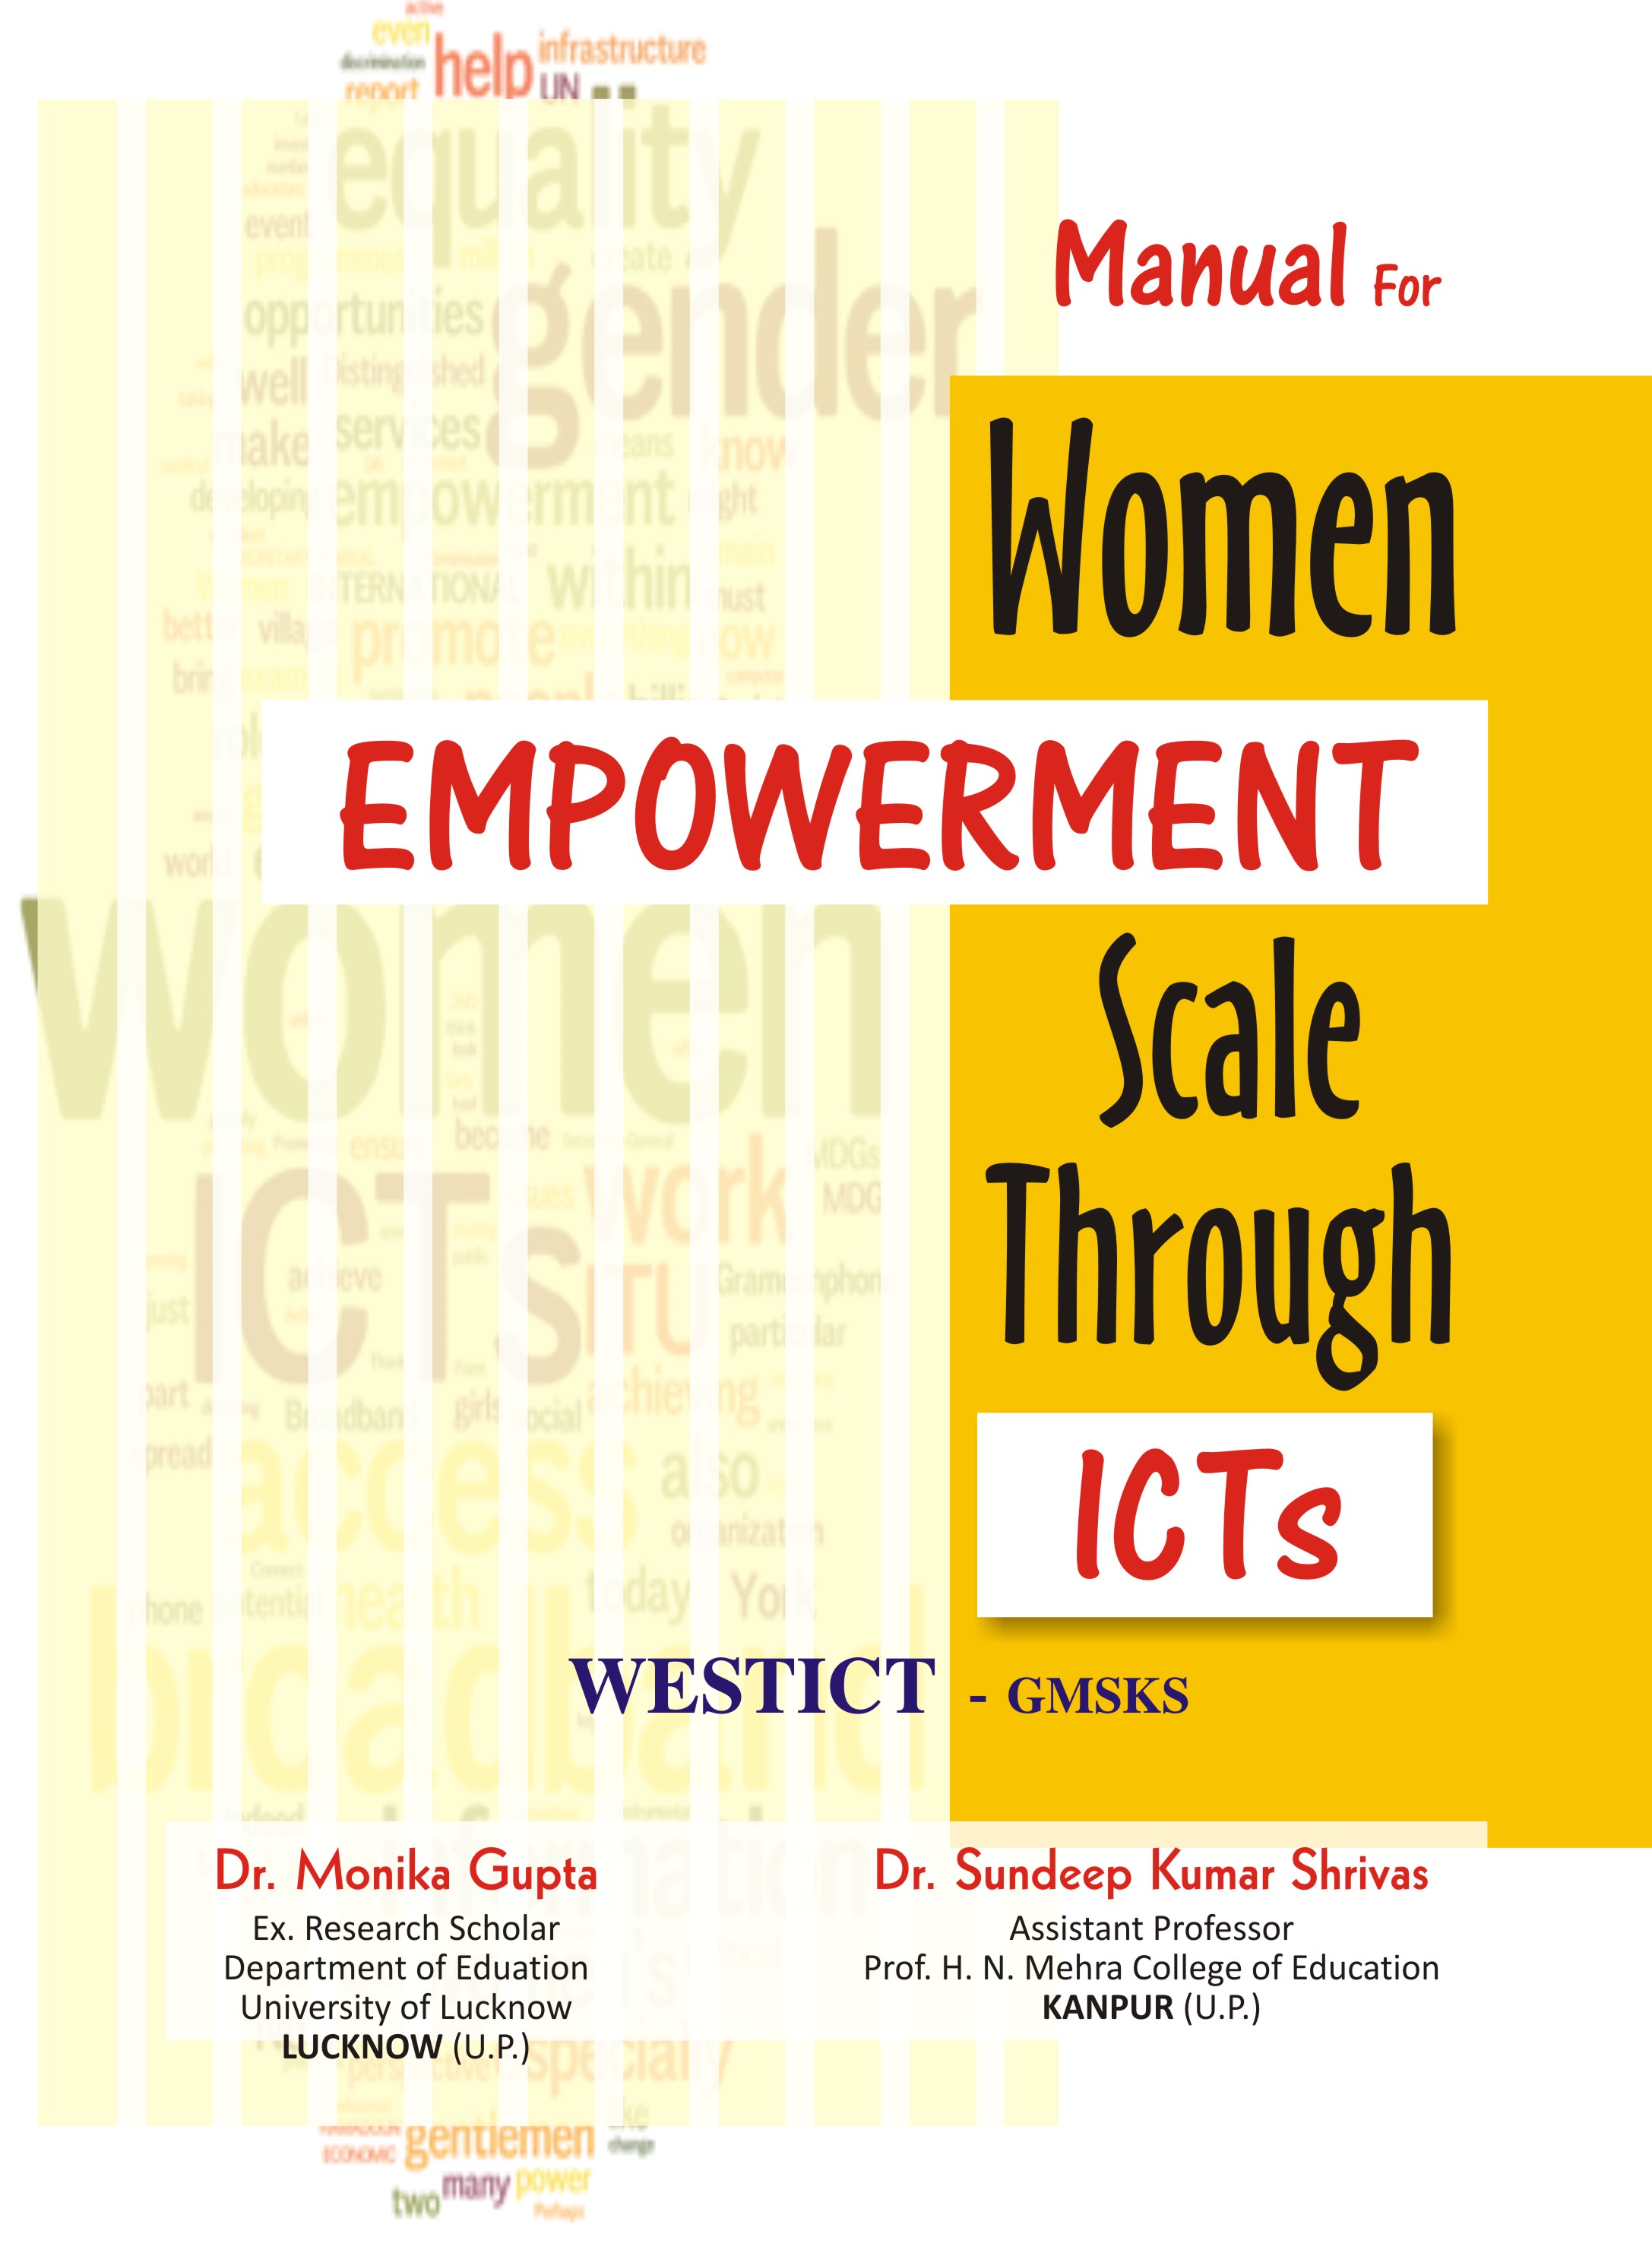 WOMEN-EMPOWERMENT-SCALE-THROUGH-ICTs